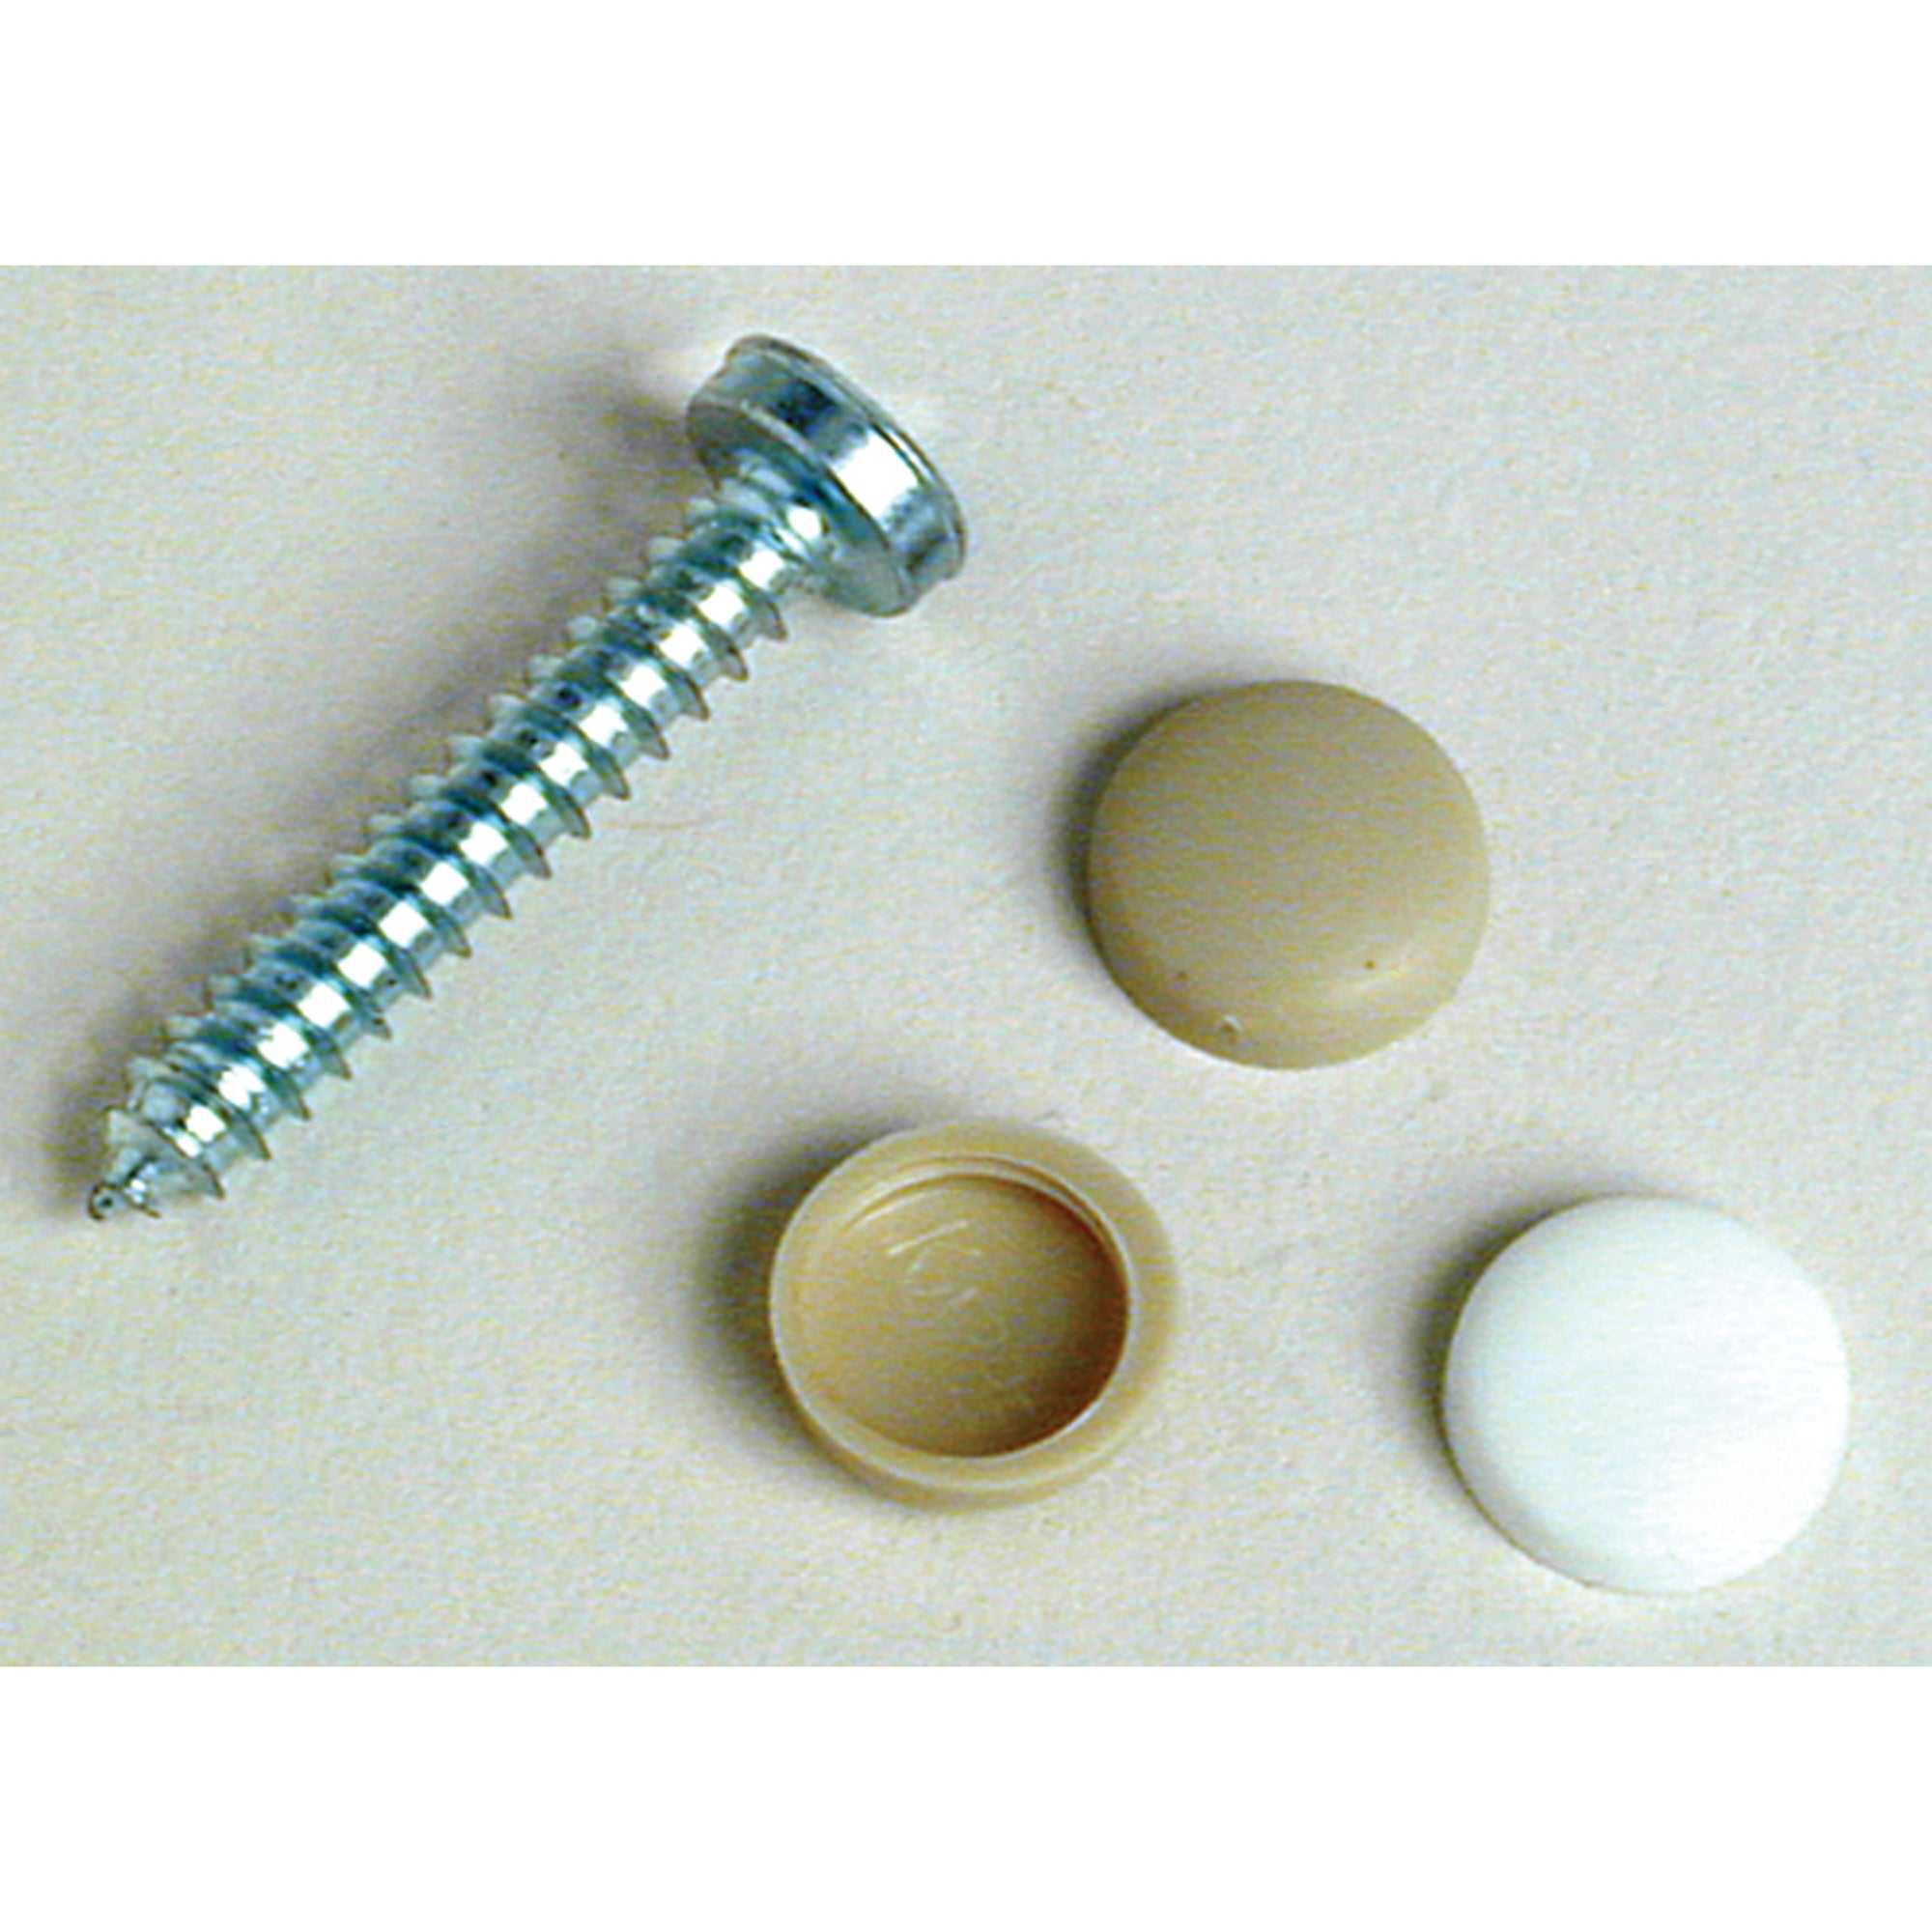 RV Designer H618 Dashboard Screws With Caps - White, Pack of 14